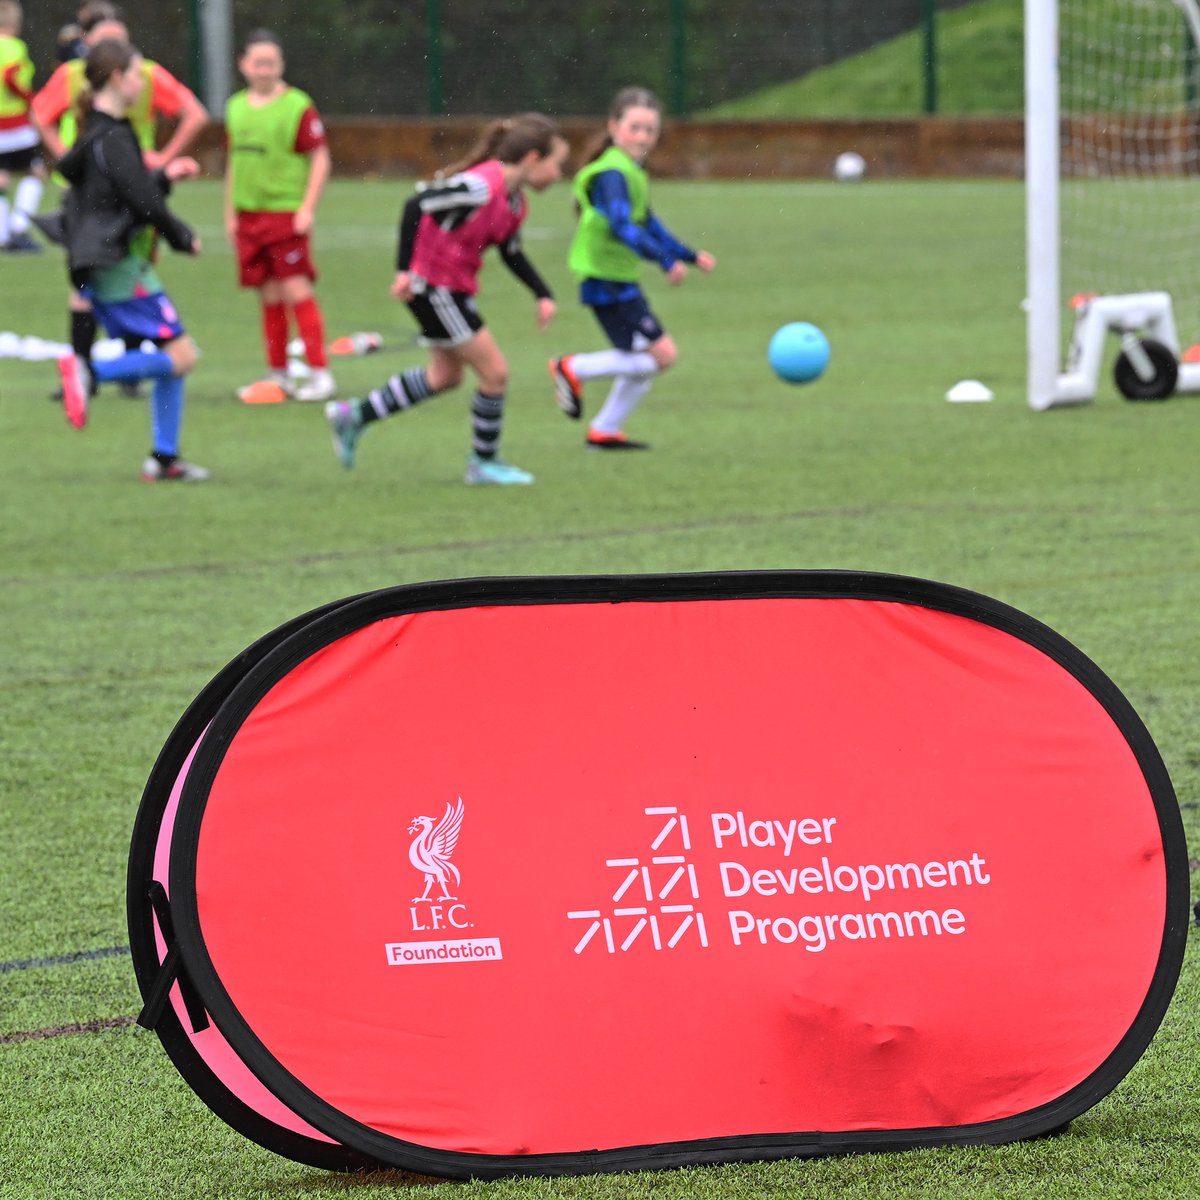 📢Our May half-term PDP Football Camps are live! 🗓️28/5 📍Halewood Leisure 🗓️29/5 📍Sutton Leisure 🗓️30/5 📍Sutton Leisure 🗓️31/5 📍Netherton NAC 10am-3pm | 4-13yrs | £15 per day Book now✨ bit.ly/3SutlEp